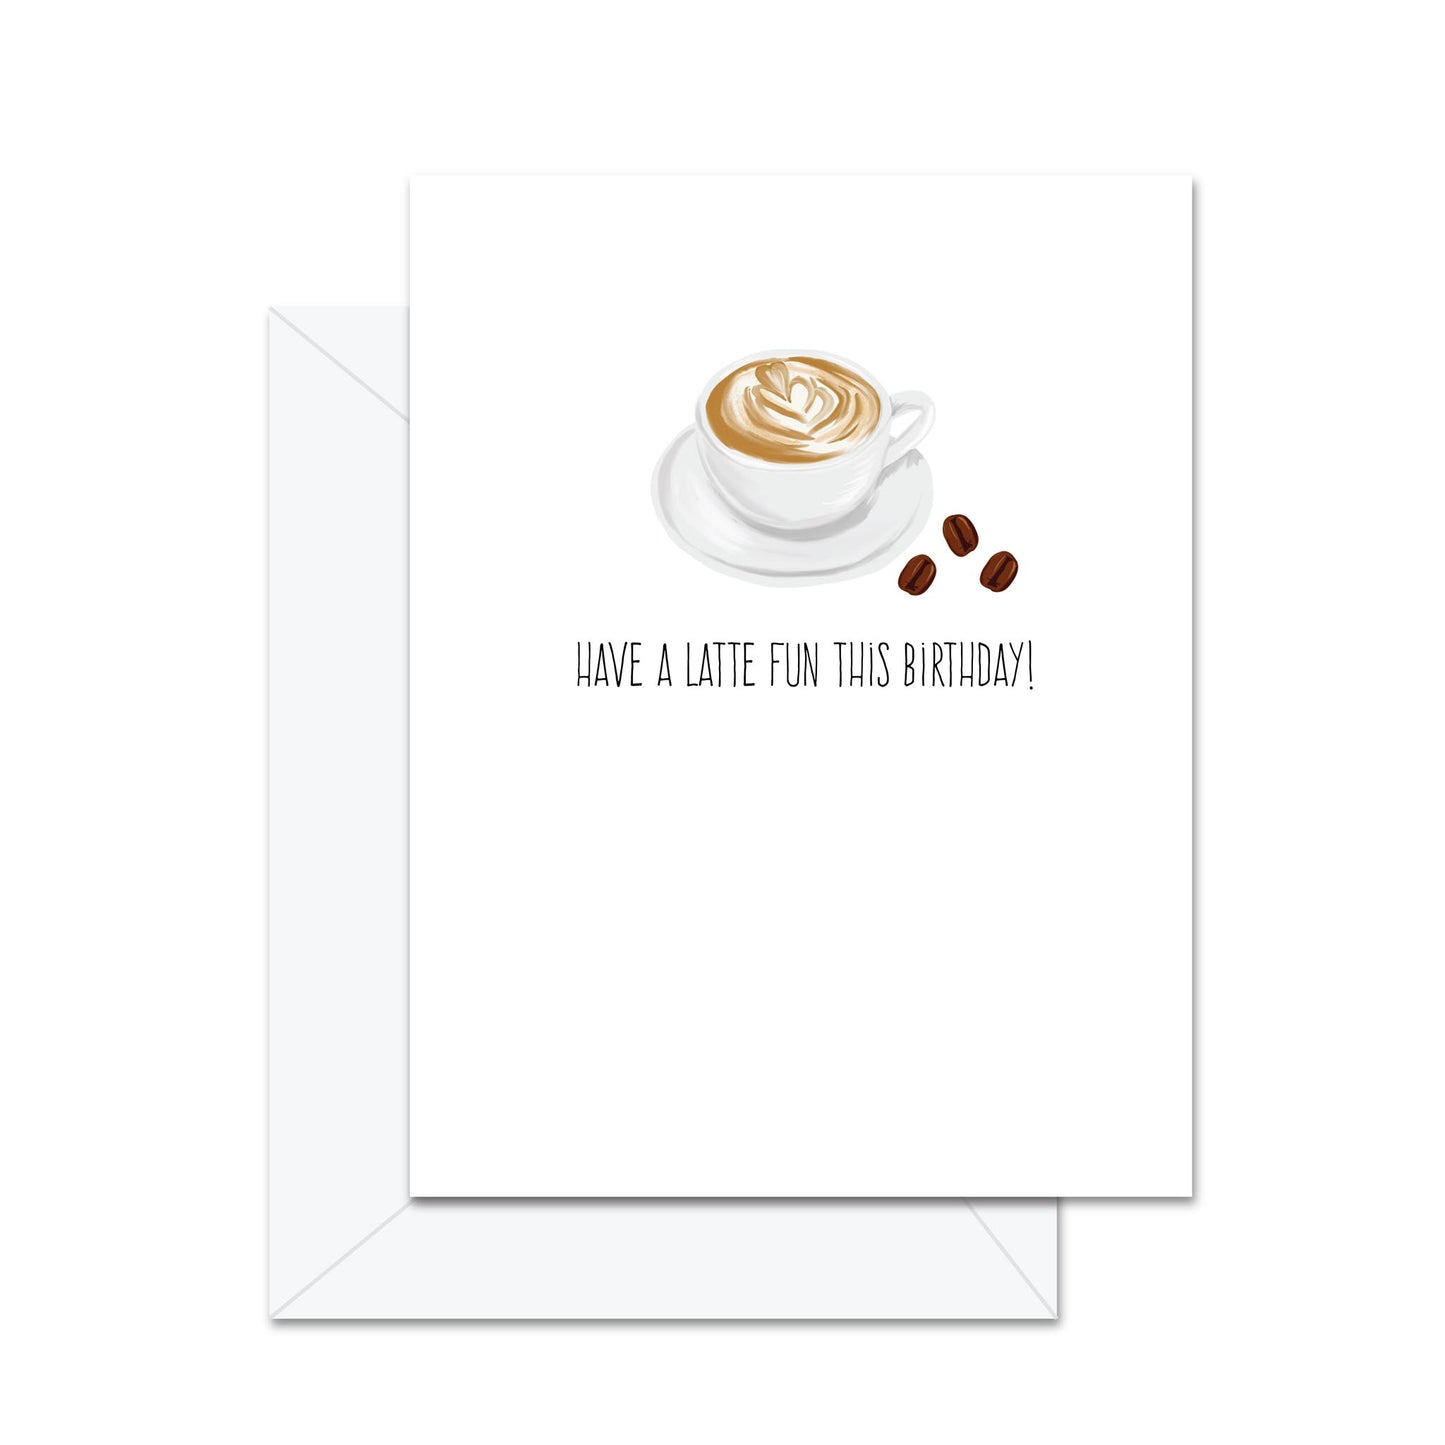 Have A Latte Fun This Birthday- Greeting Card